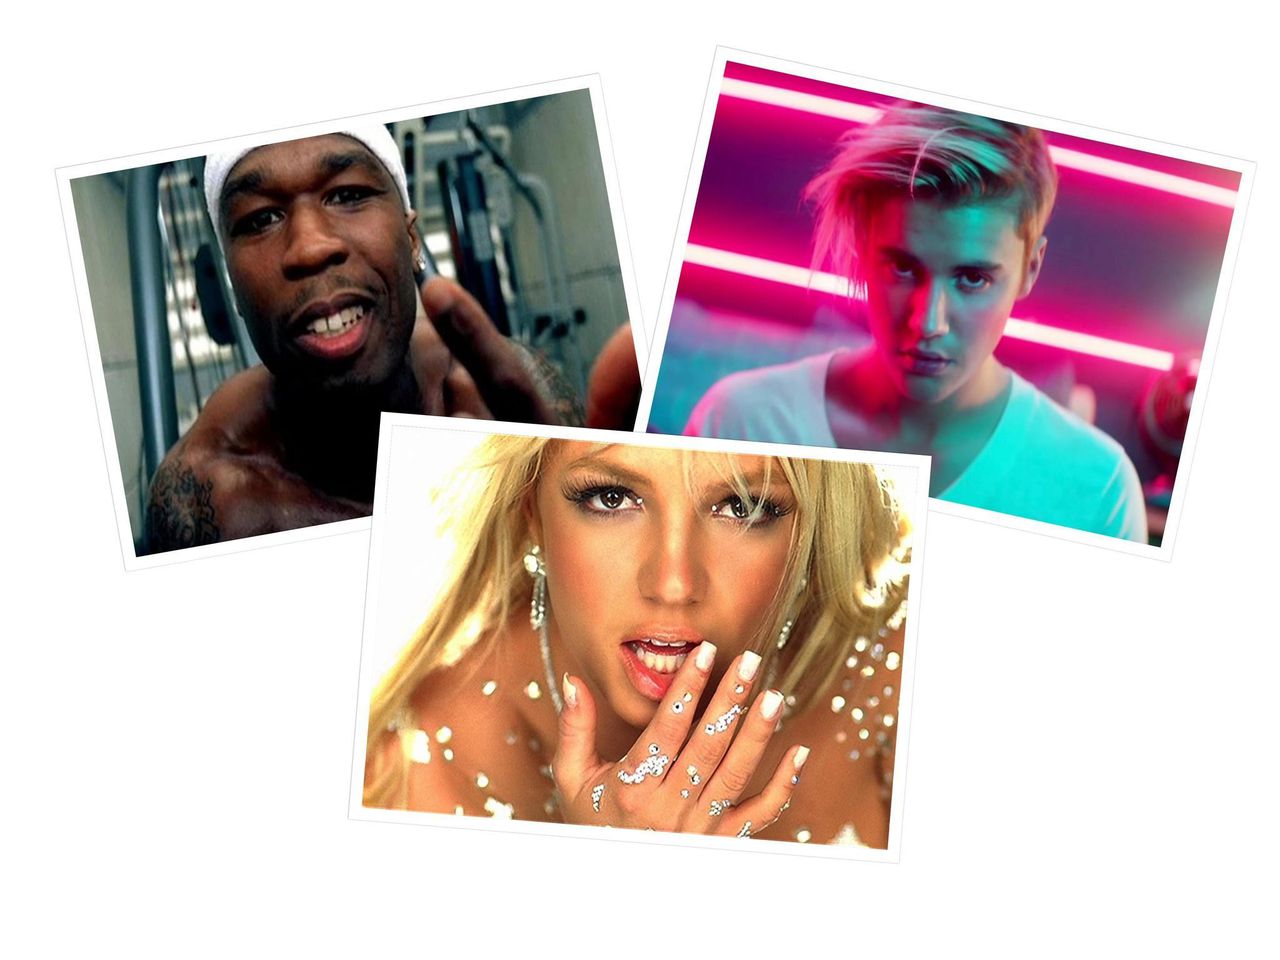 The 50 Best Throwback Songs of all time featuring Eminem, Usher, No Doubt, TLC, Miley Cyrus, Lady Gaga, and more